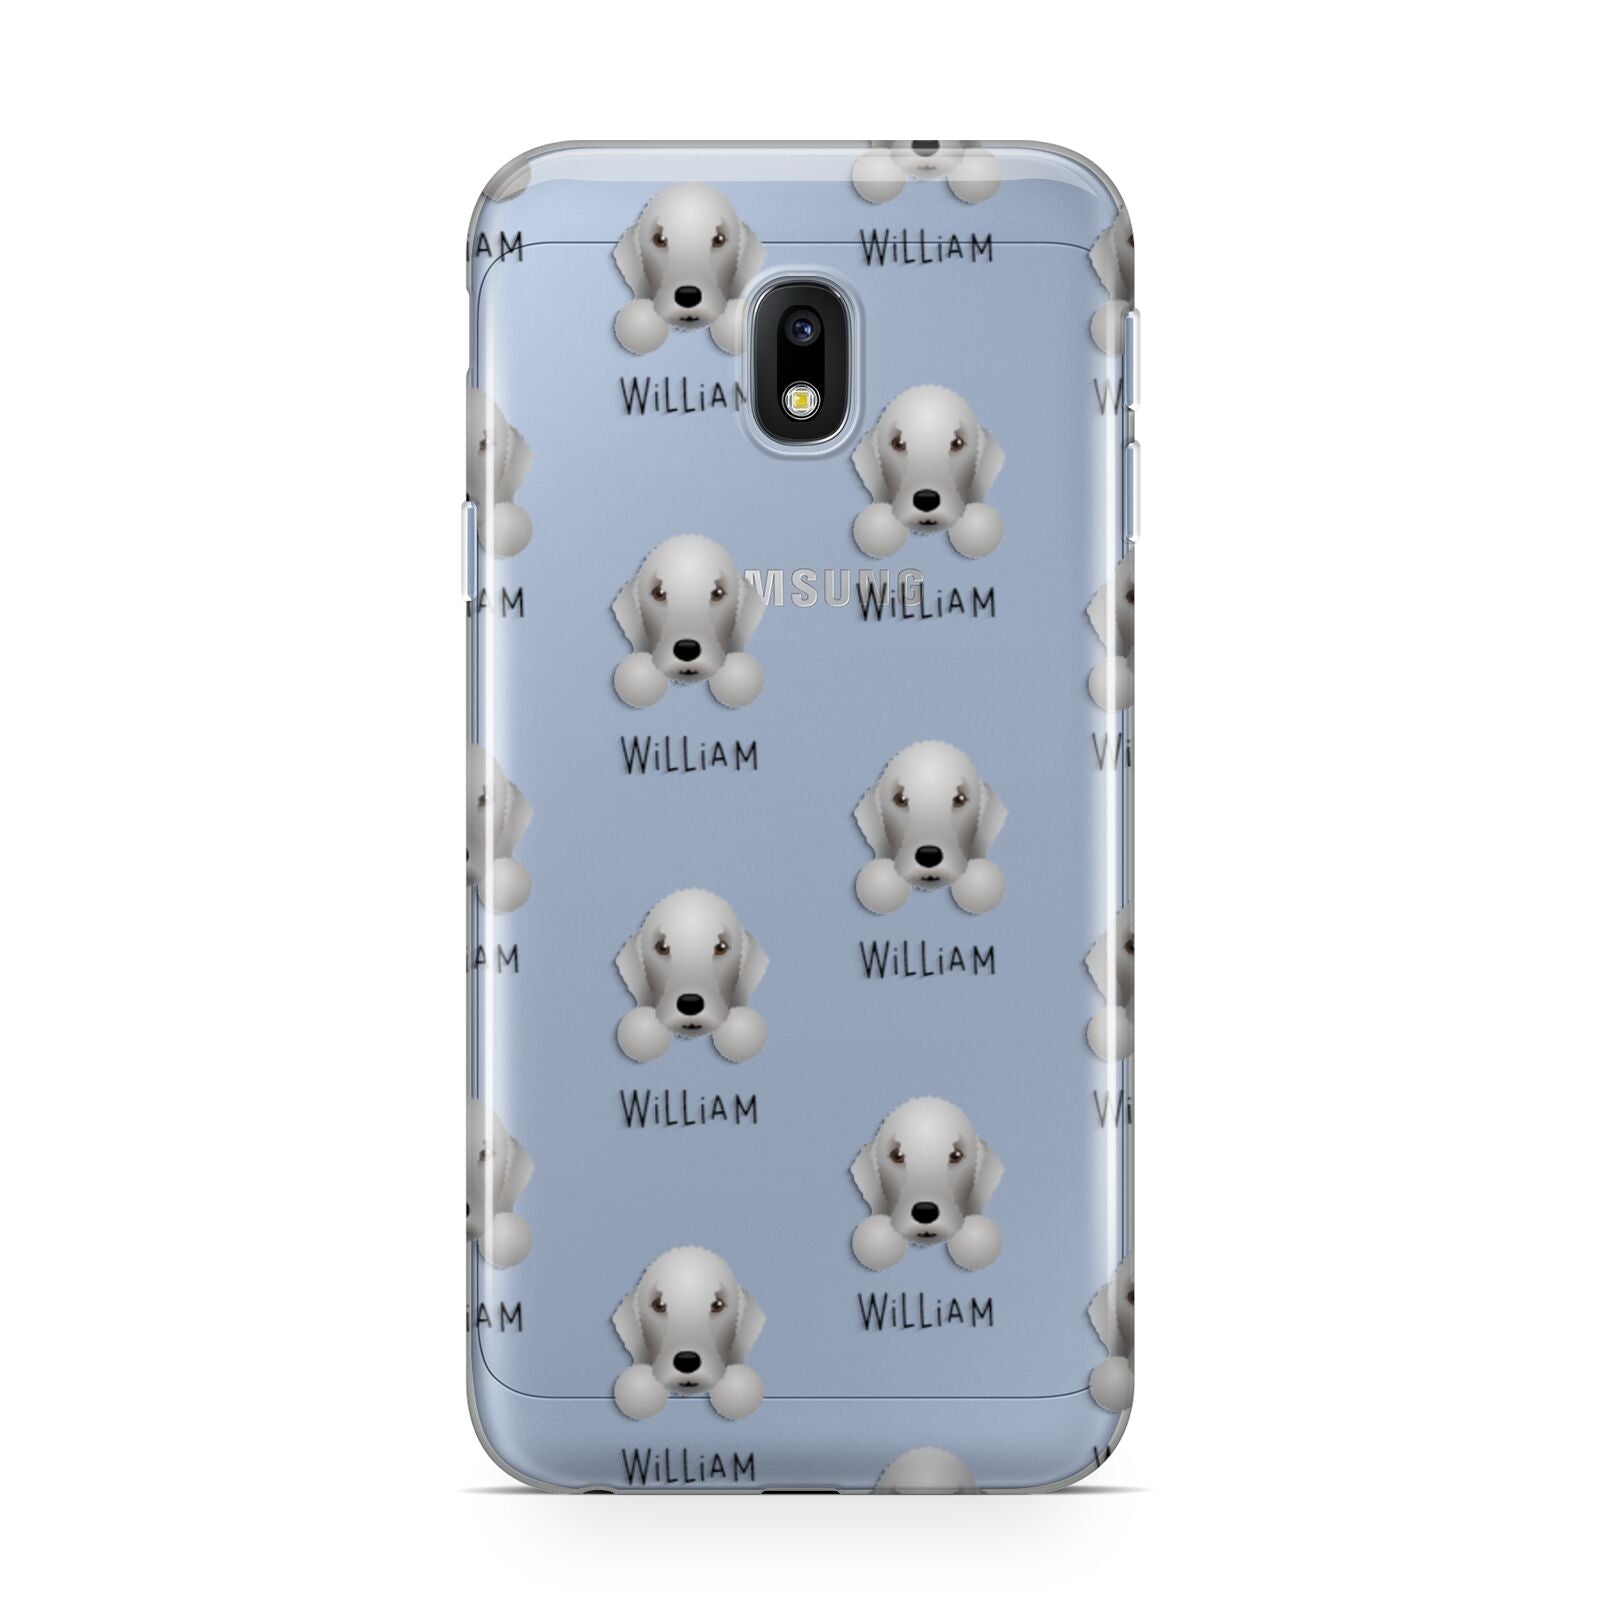 Bedlington Terrier Icon with Name Samsung Galaxy J3 2017 Case